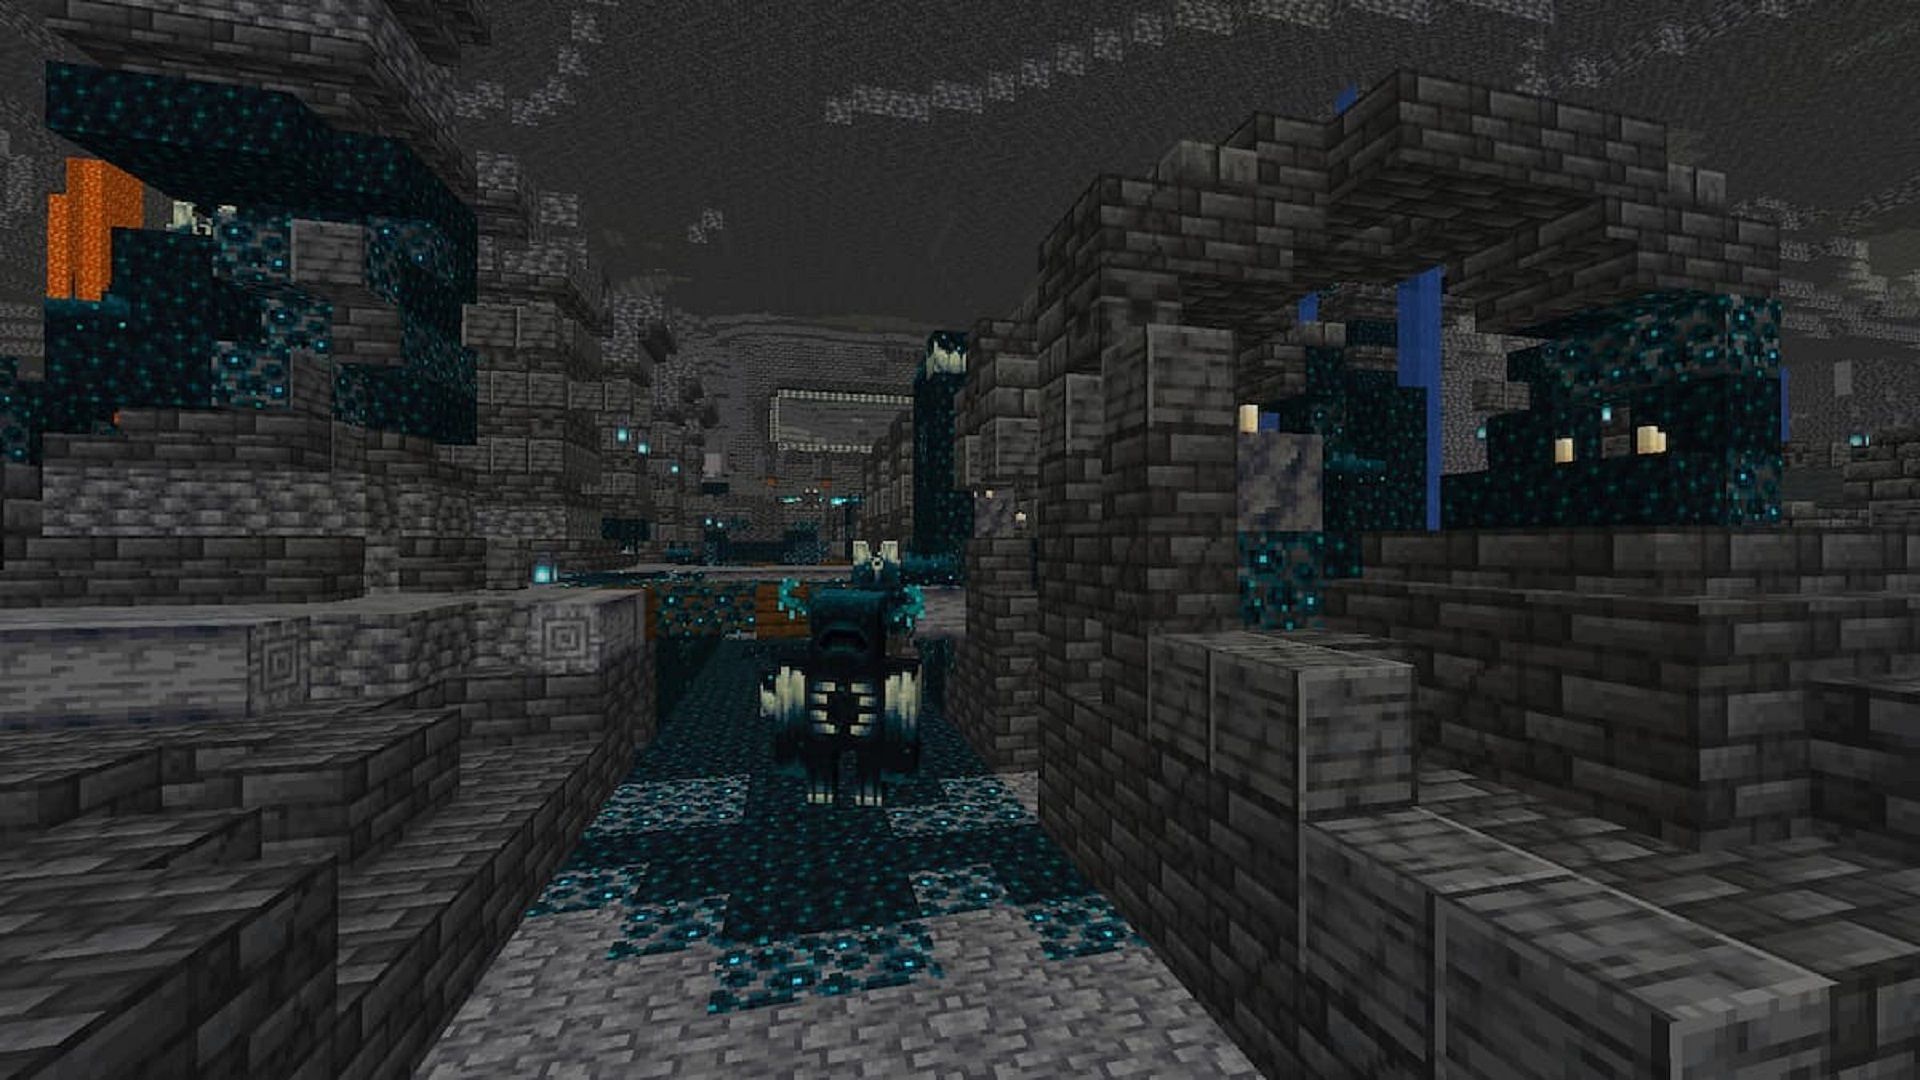 Players won&#039;t have safe harbor in this seed&#039;s spawn point (Image via Mojang)